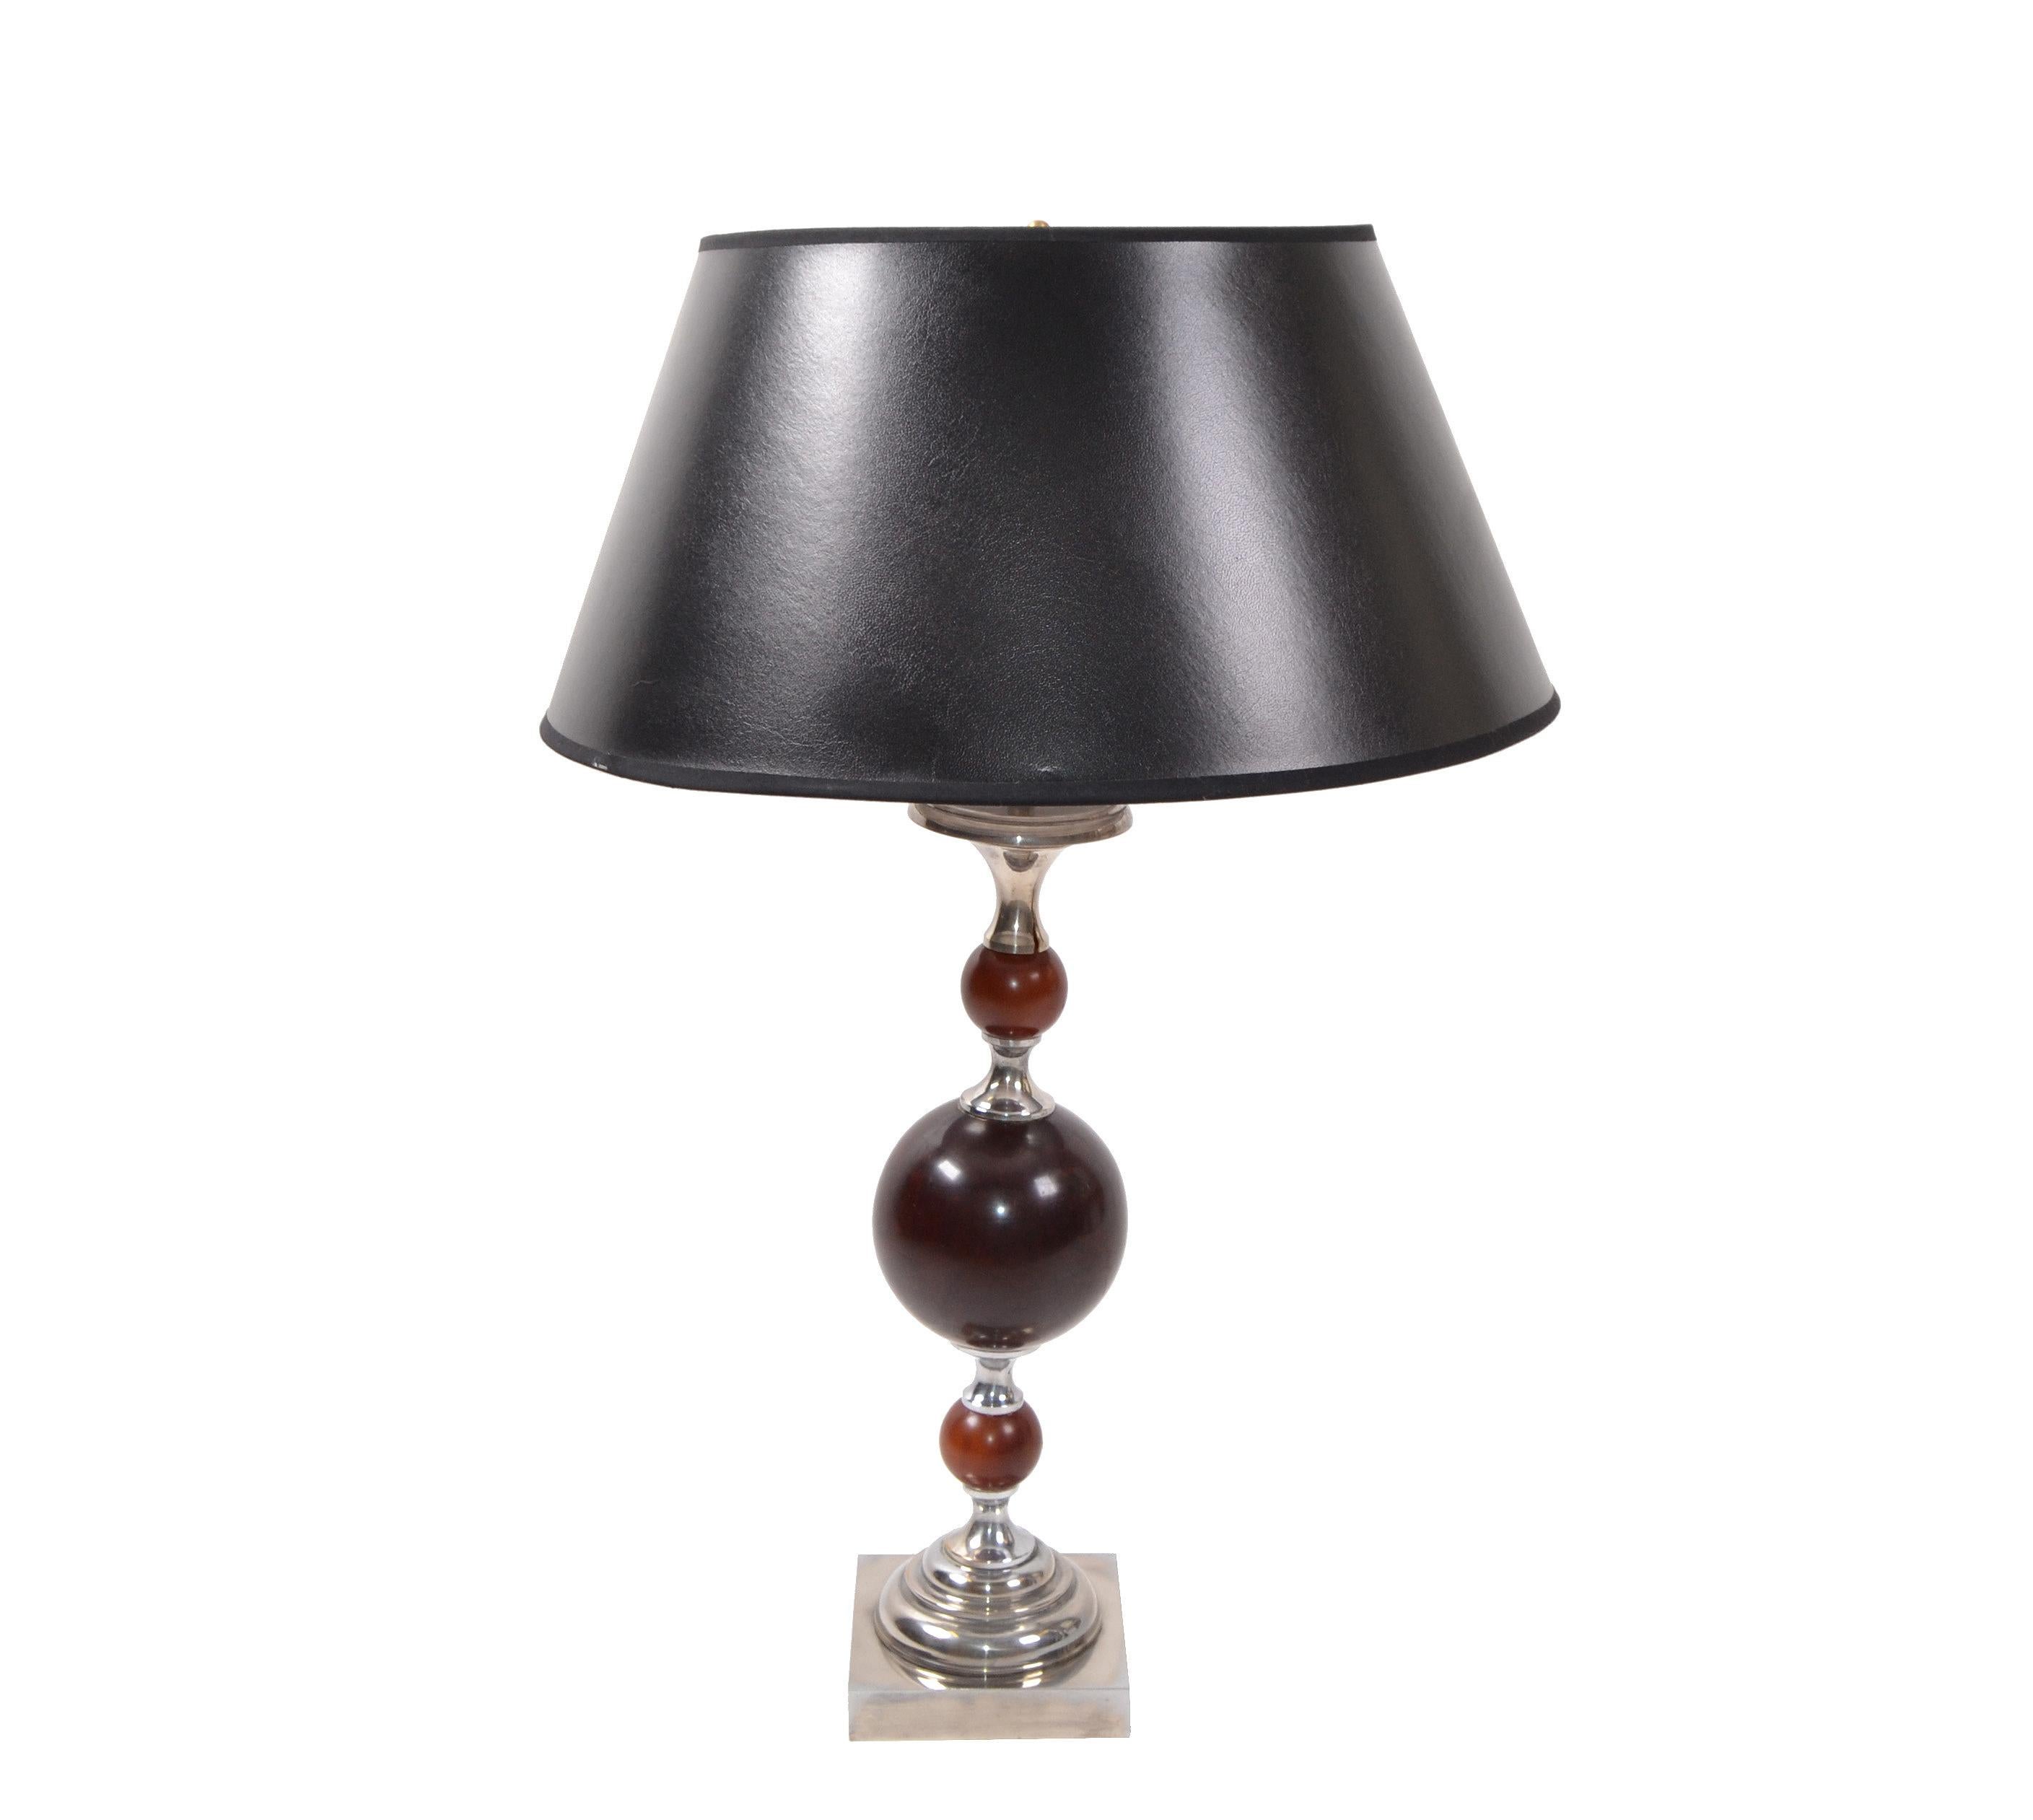 Superb Art Deco table lamp Maison Charles style nickel-plated finish with 3 burgundy resin spheres in the center.
US rewiring and takes one light bulb max. 75 watts, or LED bulb works perfect.
Comes with black and silver paper shade if desired.